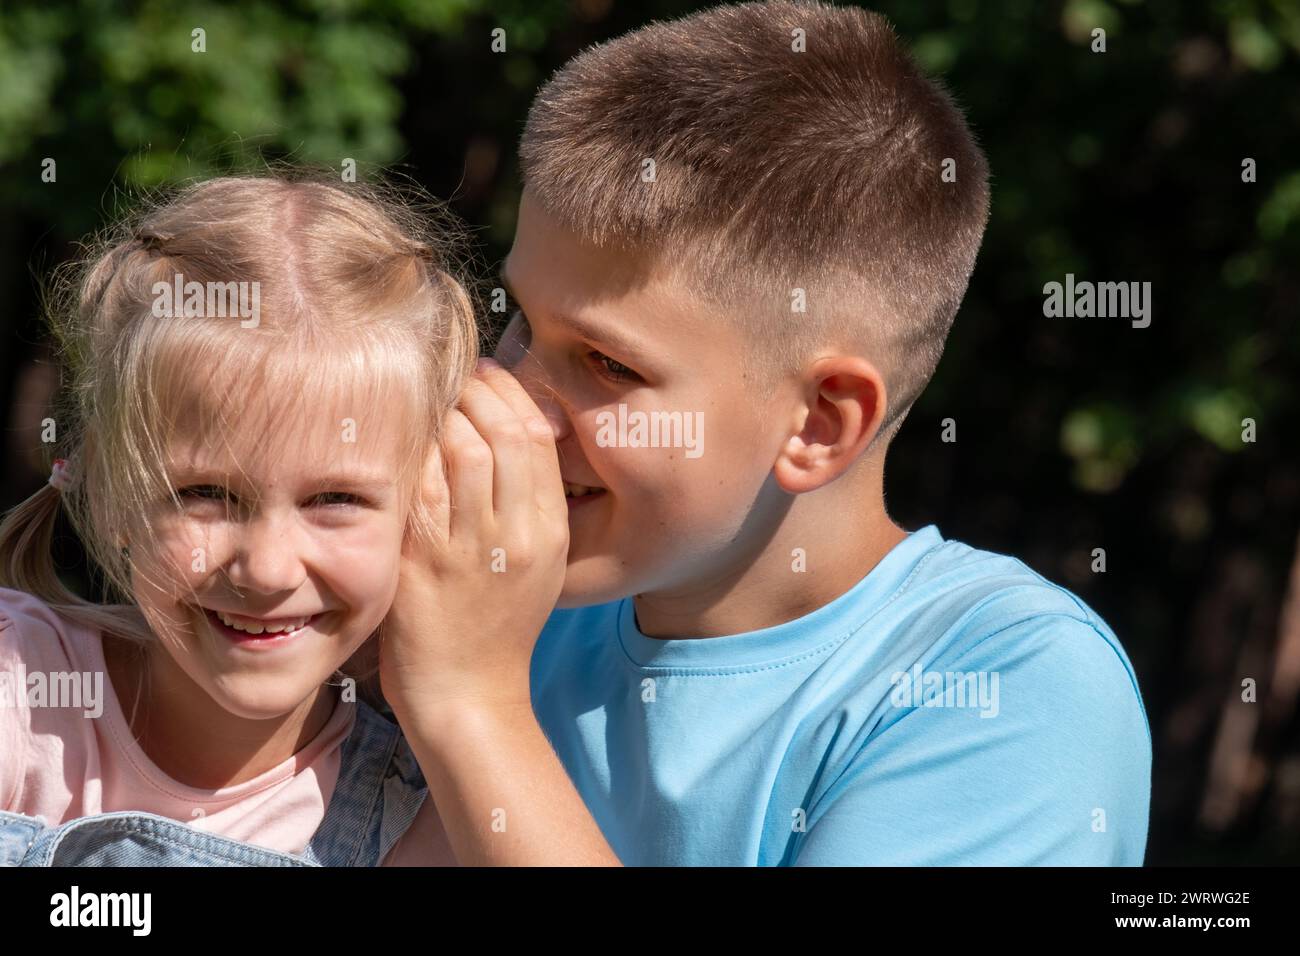 Sibling secrets unfold in a grassy glade, as a boy leans in to share a whisper with his grinning sister, used for National siblings day, happiness in Stock Photo